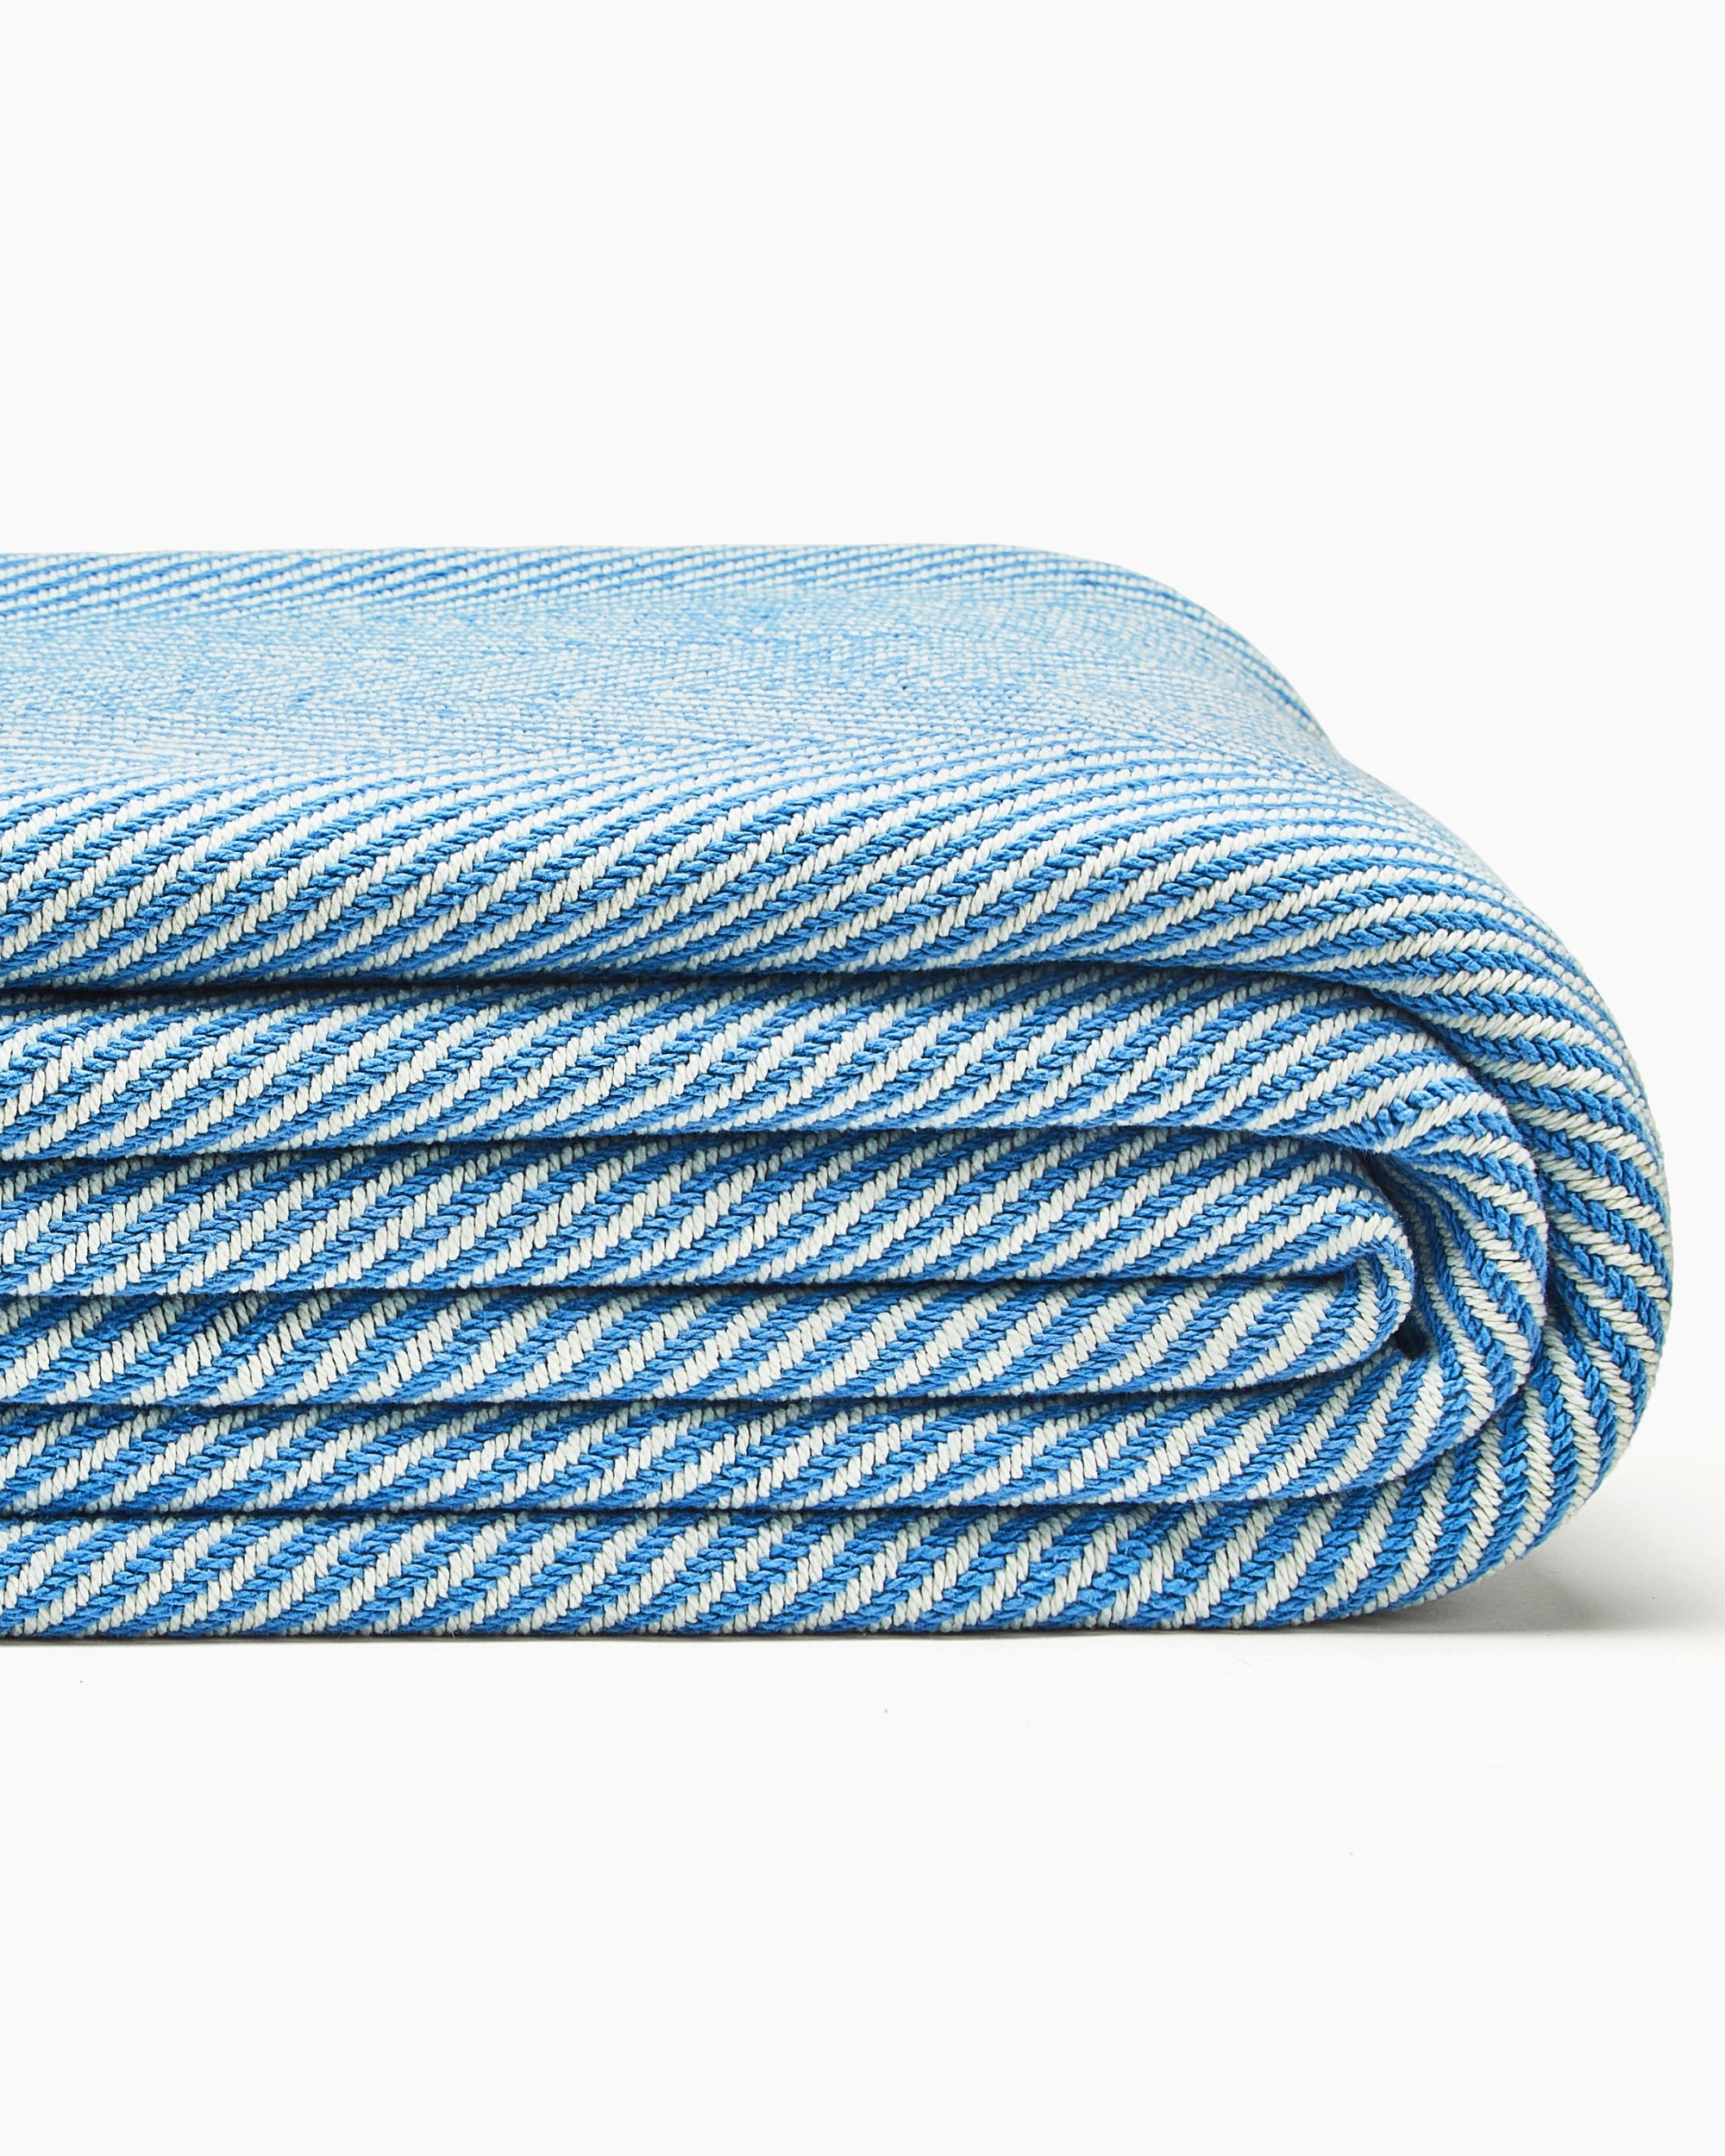 made in america bed size blanket cover throw in coastal blue